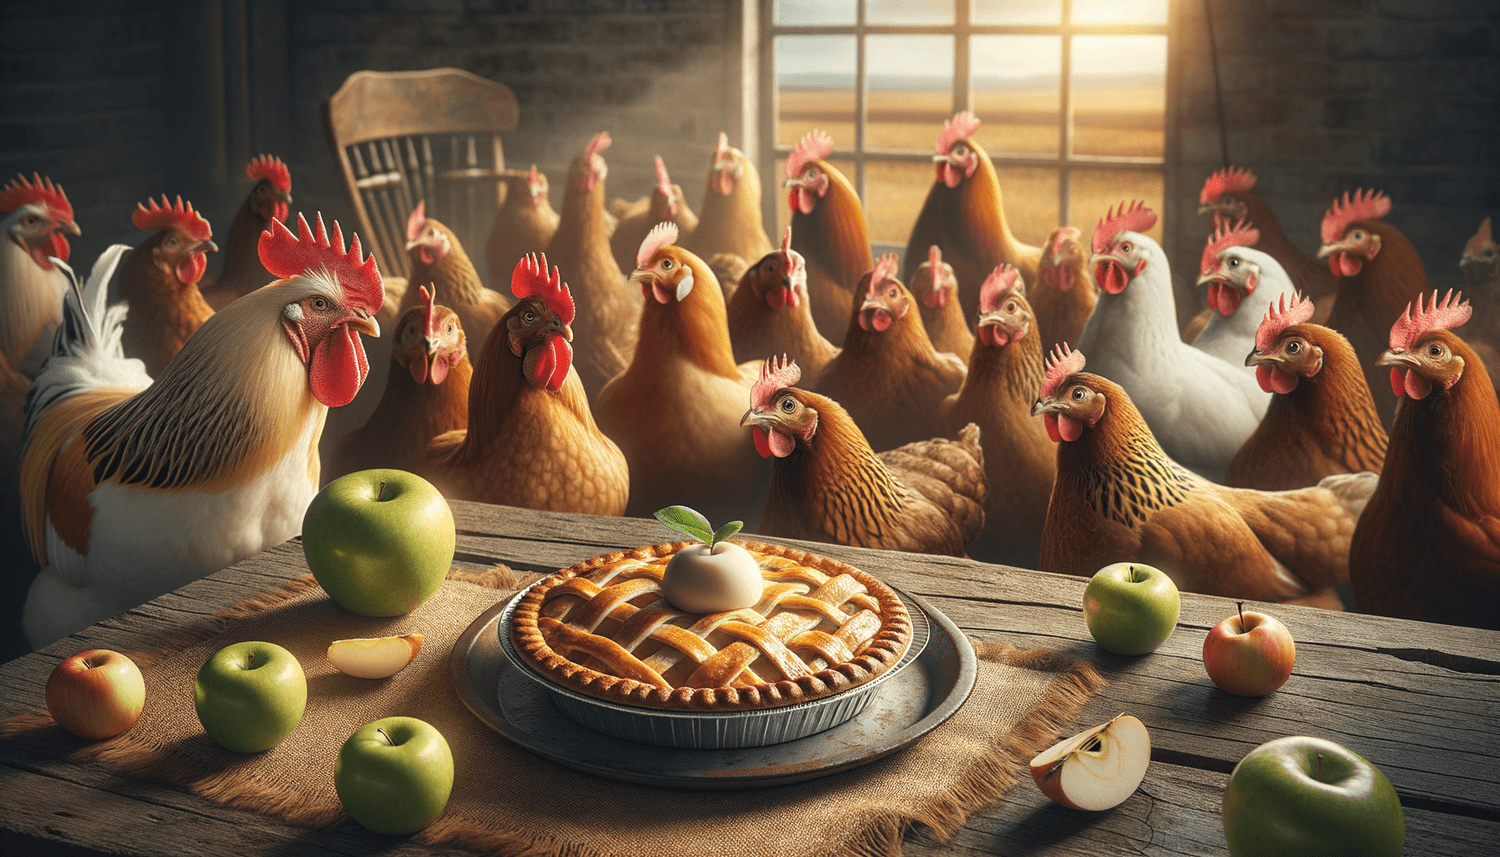 Can Chickens Eat Apple Pie?